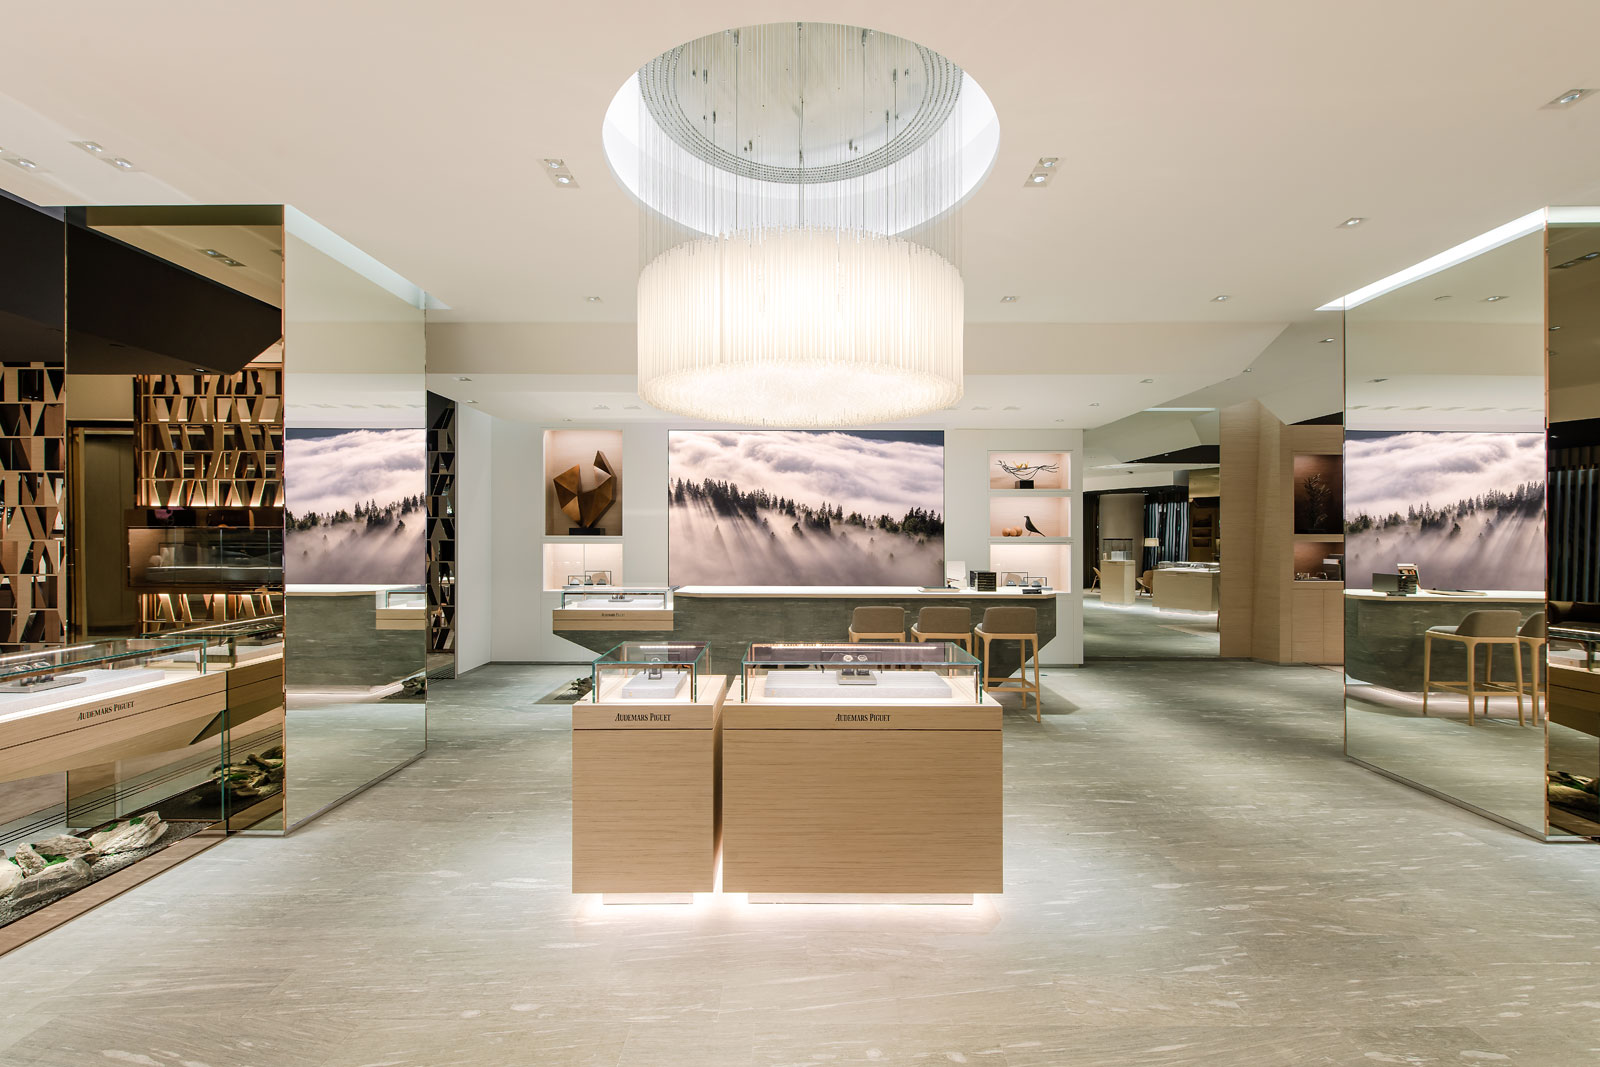 Audemars Piguet Reopens Its Flagship Boutique At The Starhill In KL